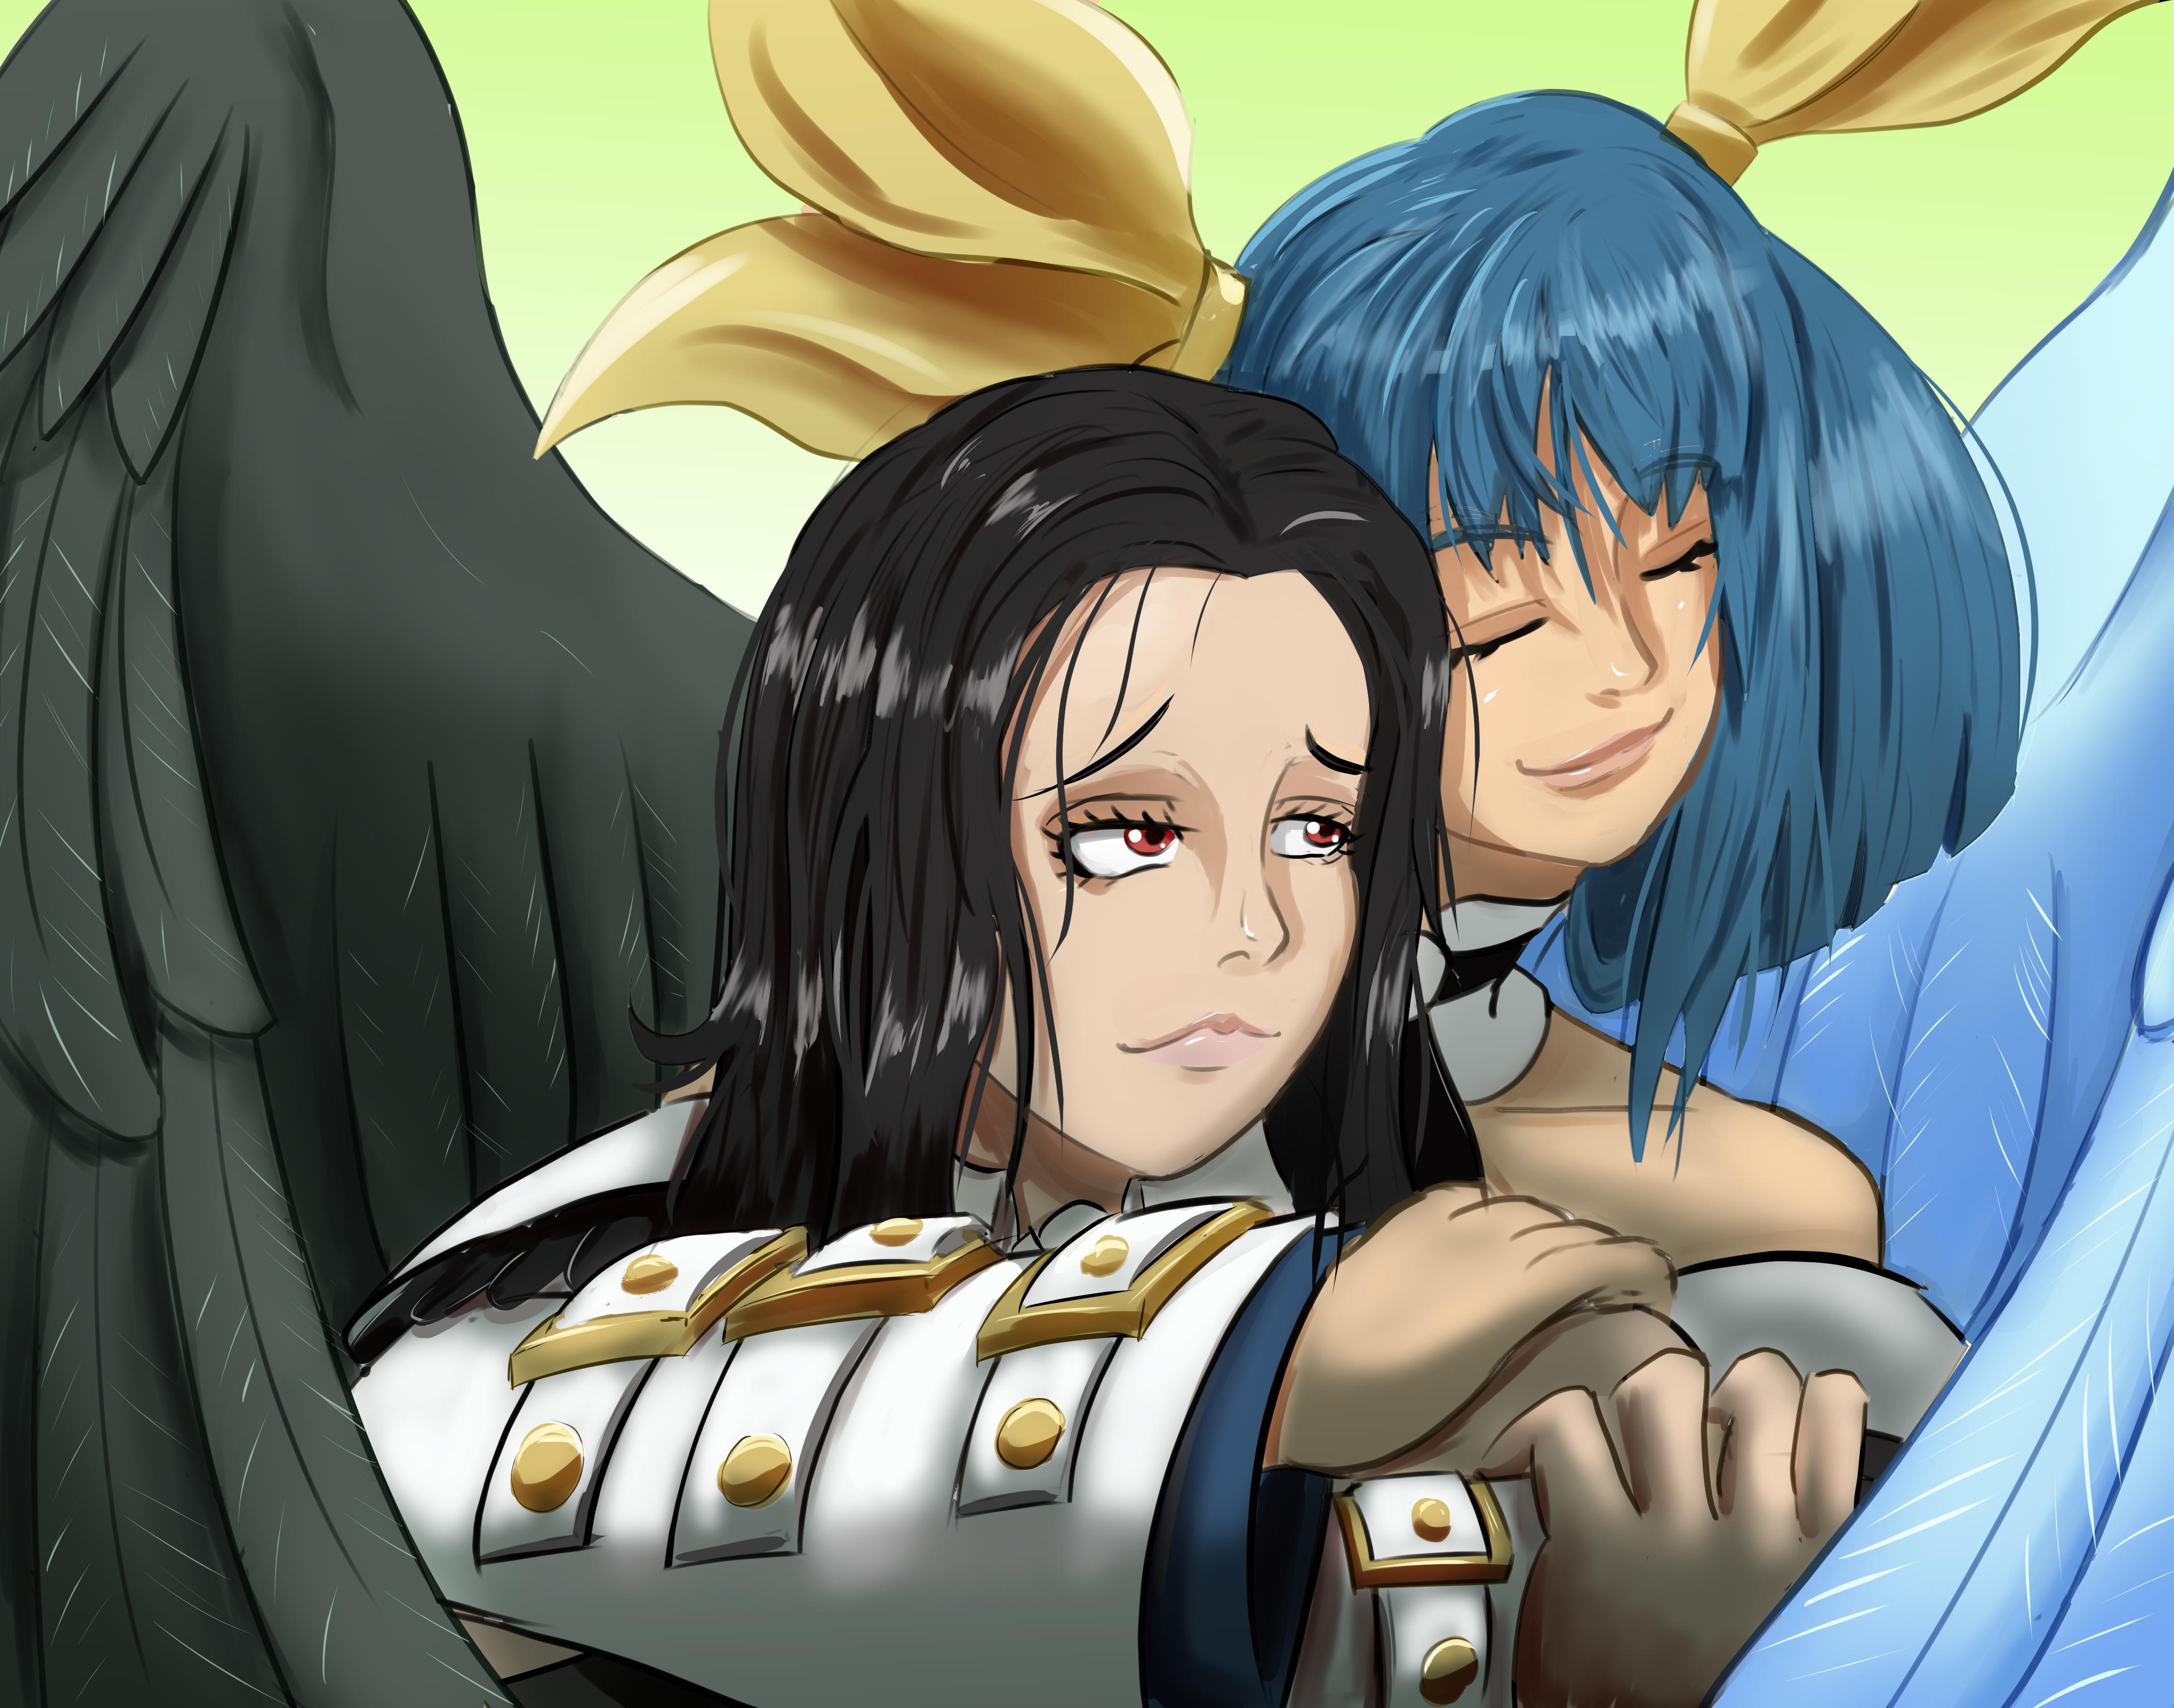 Anime 4200x3300 Guilty Gear Guilty gear strive Guilty Gear Xrd Dizzy (Guilty Gear) anime couple couple anime girl with wings anime games Testament (guilty gear) women fighting games Testament x Dizzy